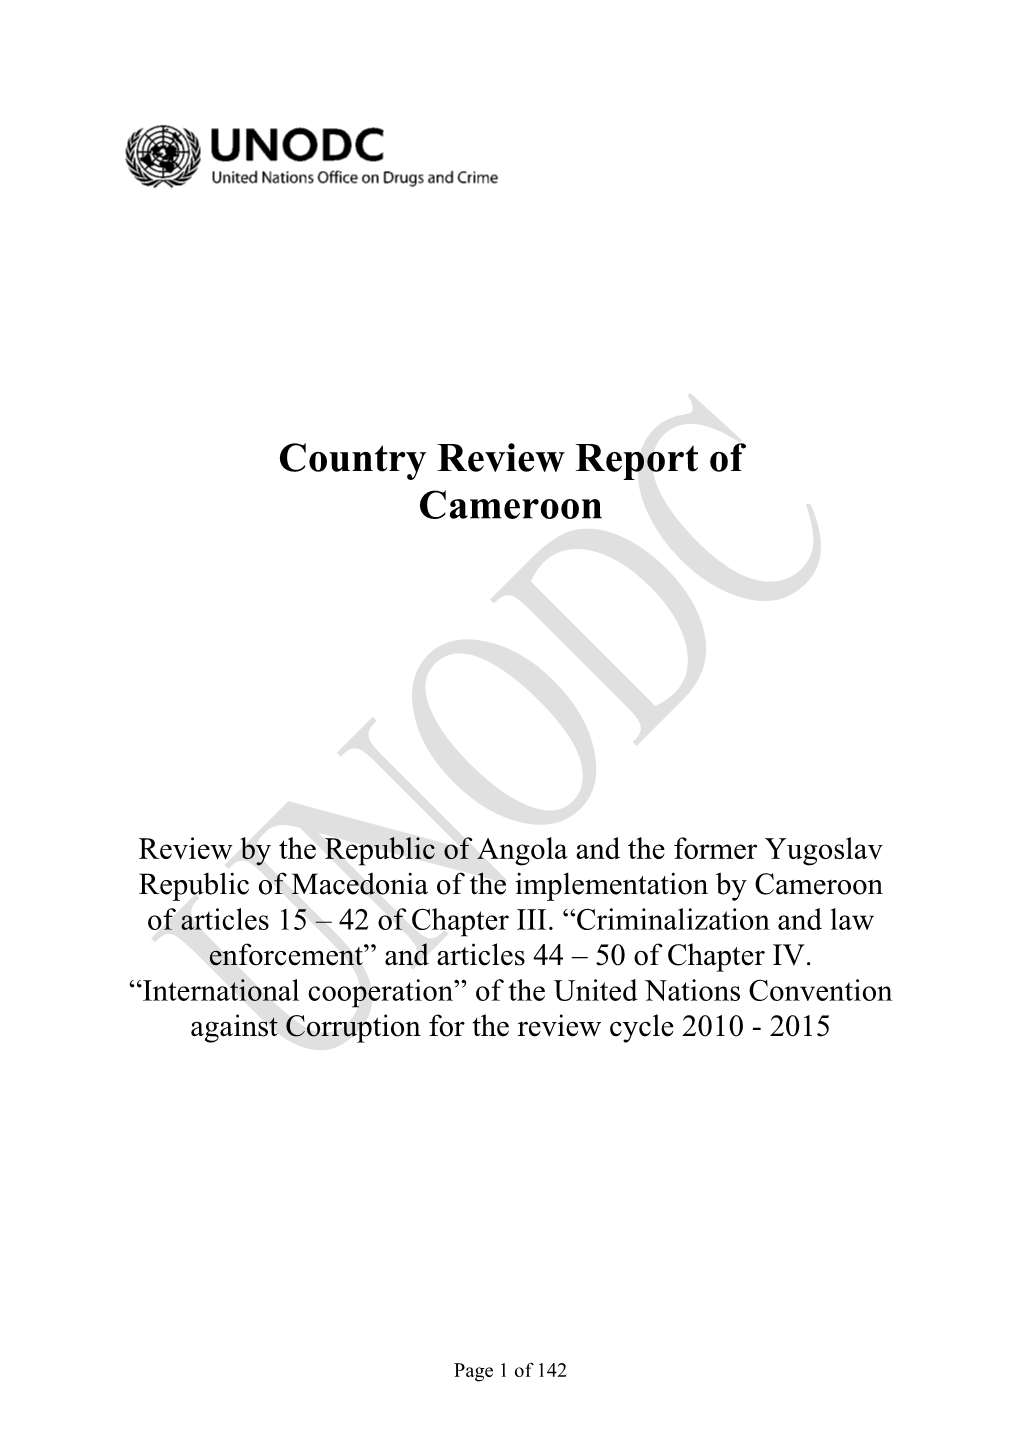 Country Review Report of Cameroon